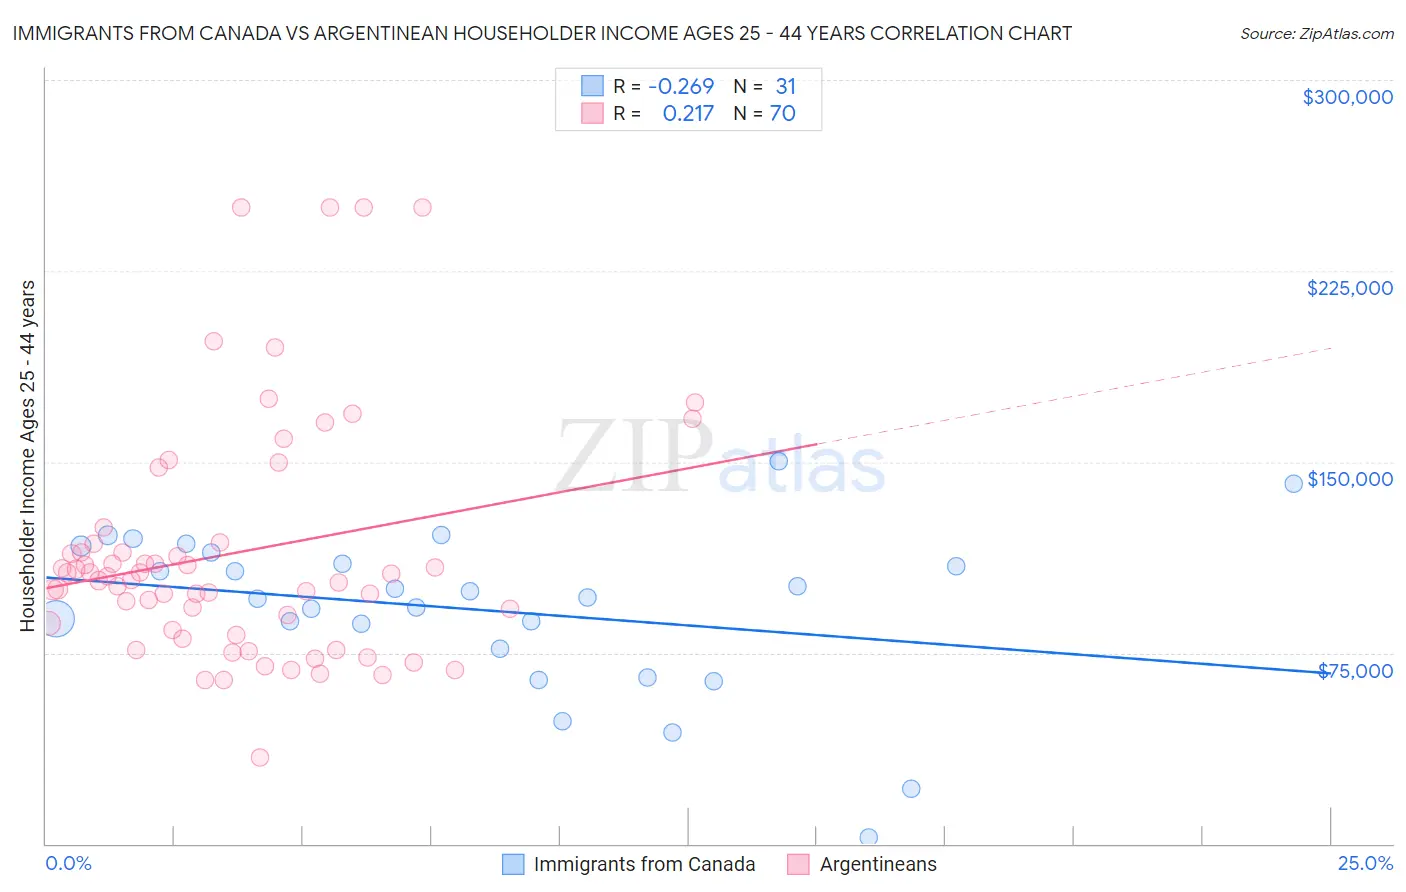 Immigrants from Canada vs Argentinean Householder Income Ages 25 - 44 years